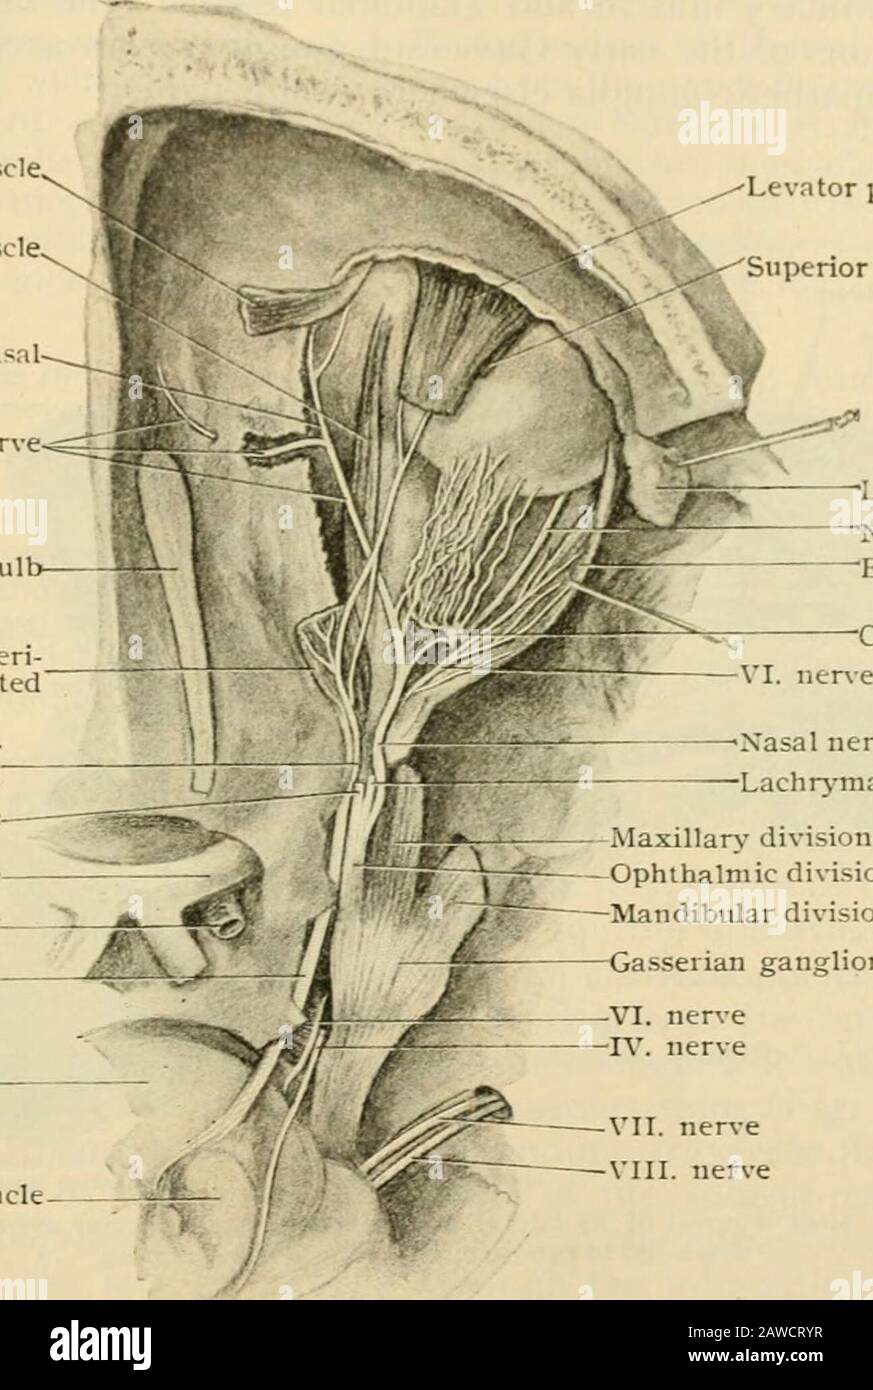 Human anatomy, including structure and development and practical considerations . Near the pulley it receives a filament (the supratrochlear;from the frontal nerve. It supplies the skin of the upper eyelid and root of the nose, as well asthe conjunctiva and the lachrymal caruncle and sac. (/. The internal 7iasal or septal branih (rr. incdiales) [Vv^. 104.S) supjilies the mucous mem-brane of the anterior portion of the septum. c. The external fiasal branch (rr. laierales) (Fig. 1047) supplies the front part of the middleand inferior turbinate bones and outer wall of the nasal fossa. / The anter Stock Photo